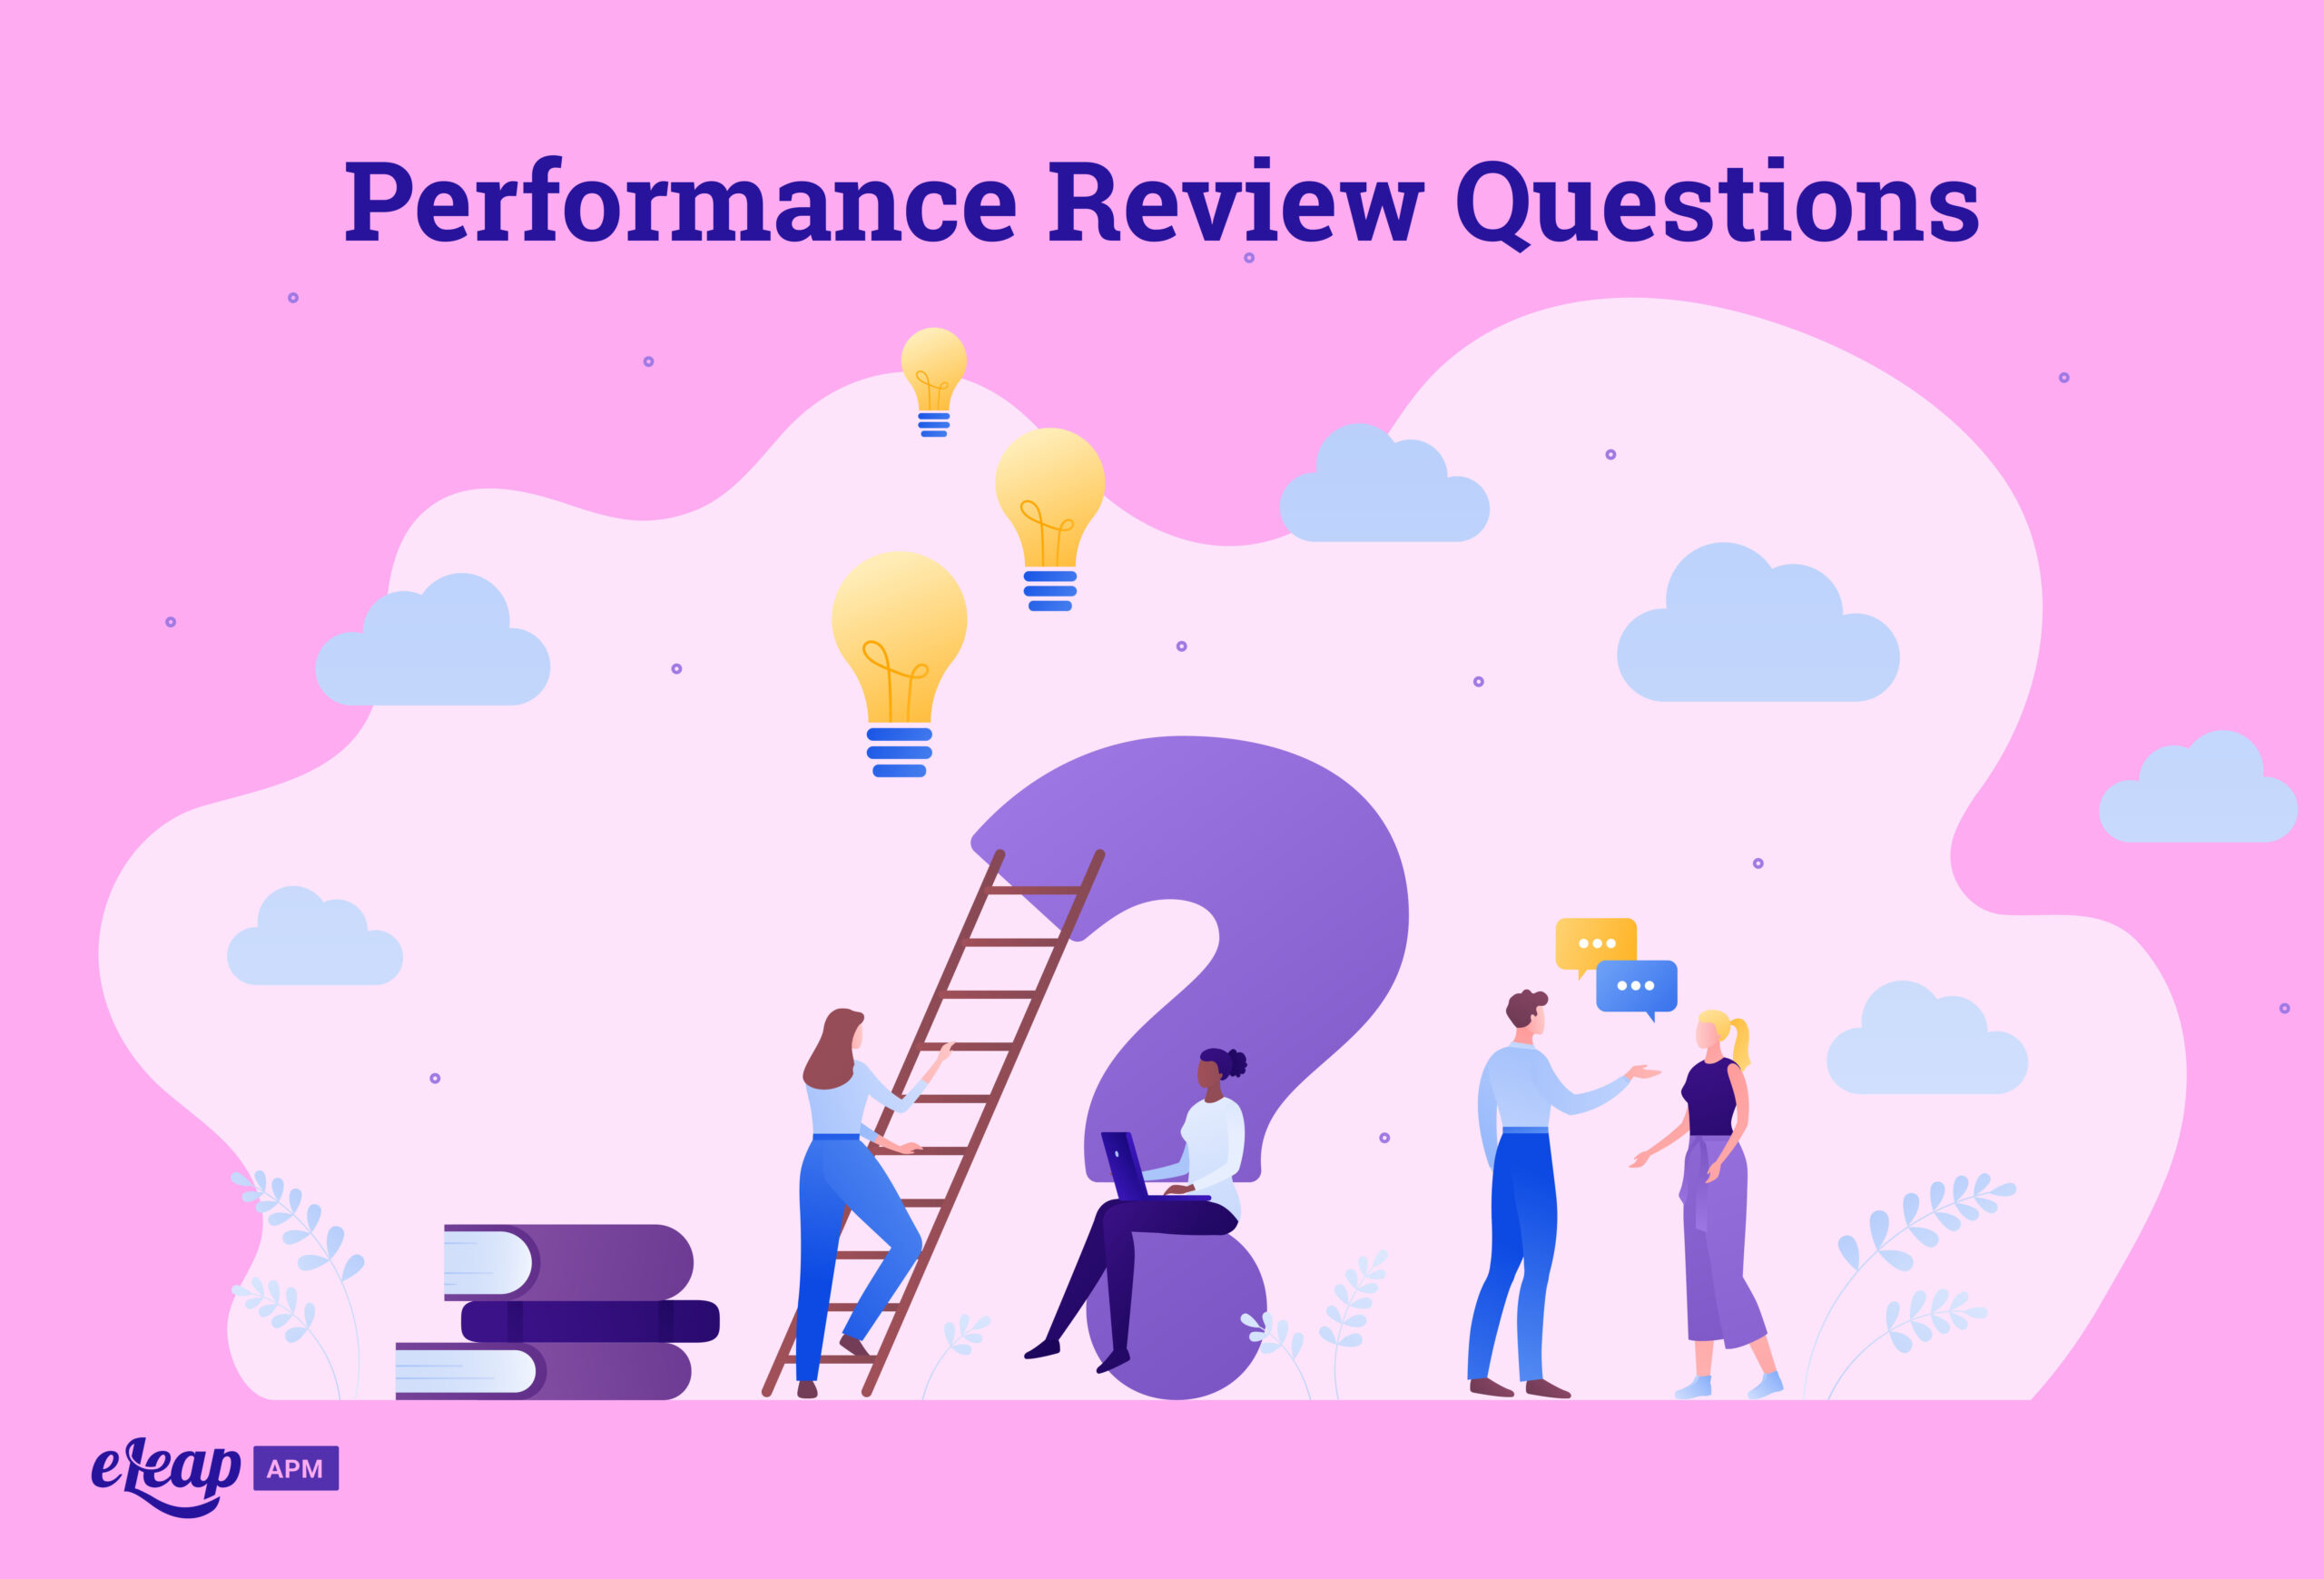 Performance Review Questions